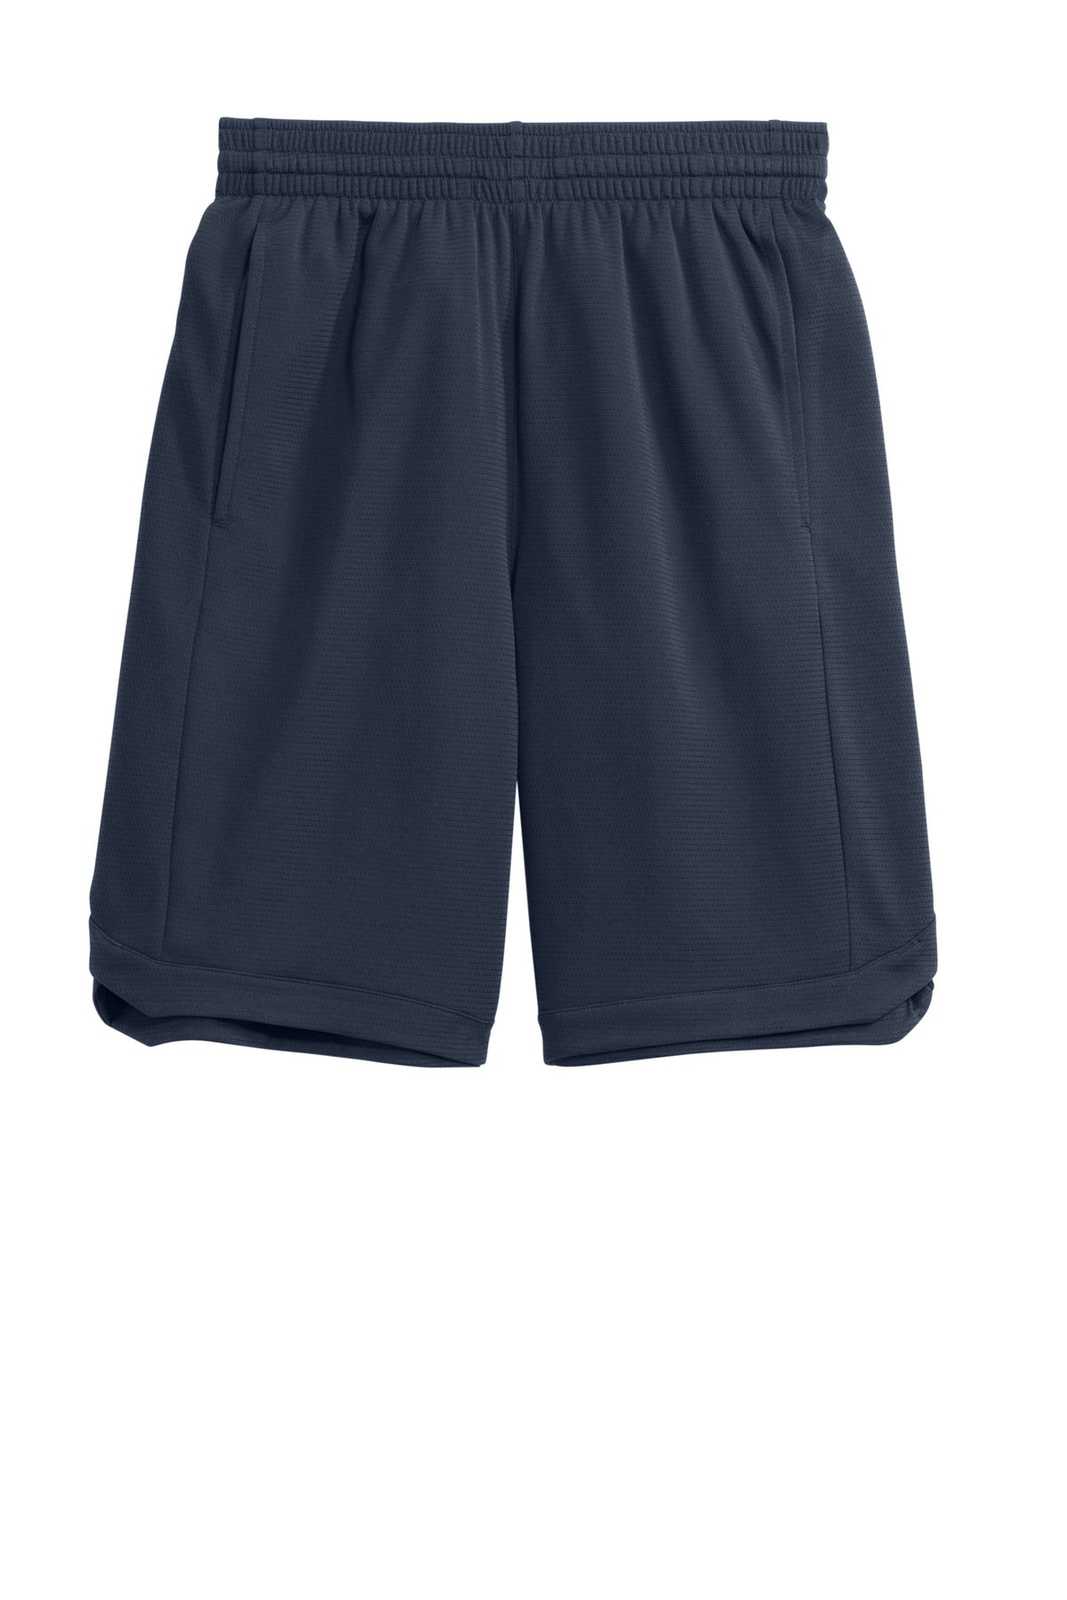 Sport-Tek ST575 Posicharge Position Short with Pockets - True Navy - HIT a Double - 1